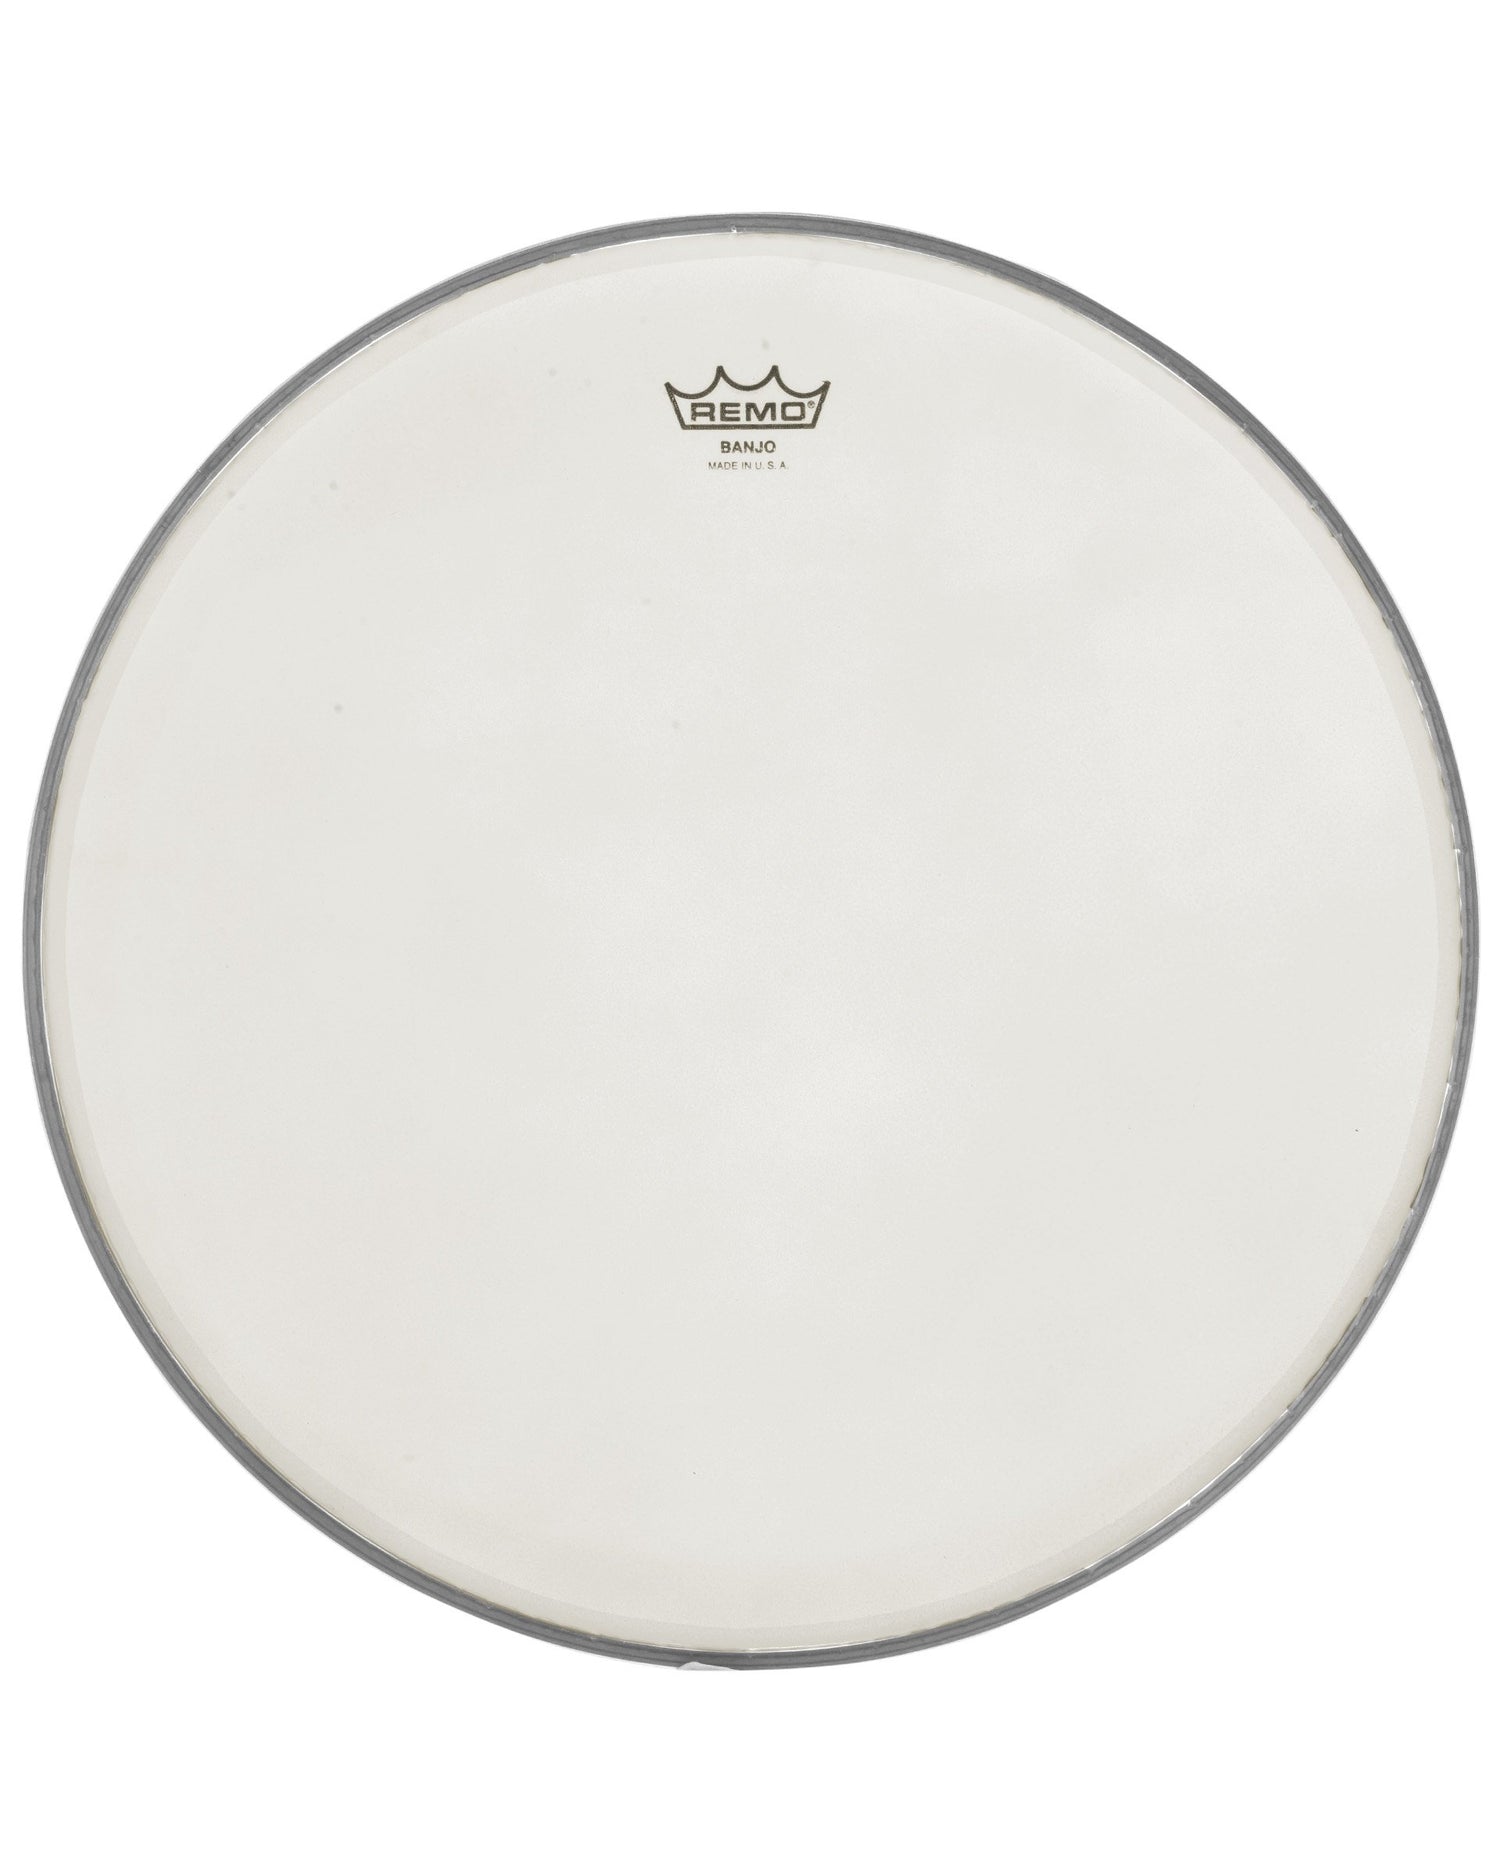 Image 1 of Remo Cloudy Banjo Head, 11 1/8 Inch Diameter, Medium Crown (7/16 Inch) - SKU# B1102-M-CDY : Product Type Accessories & Parts : Elderly Instruments